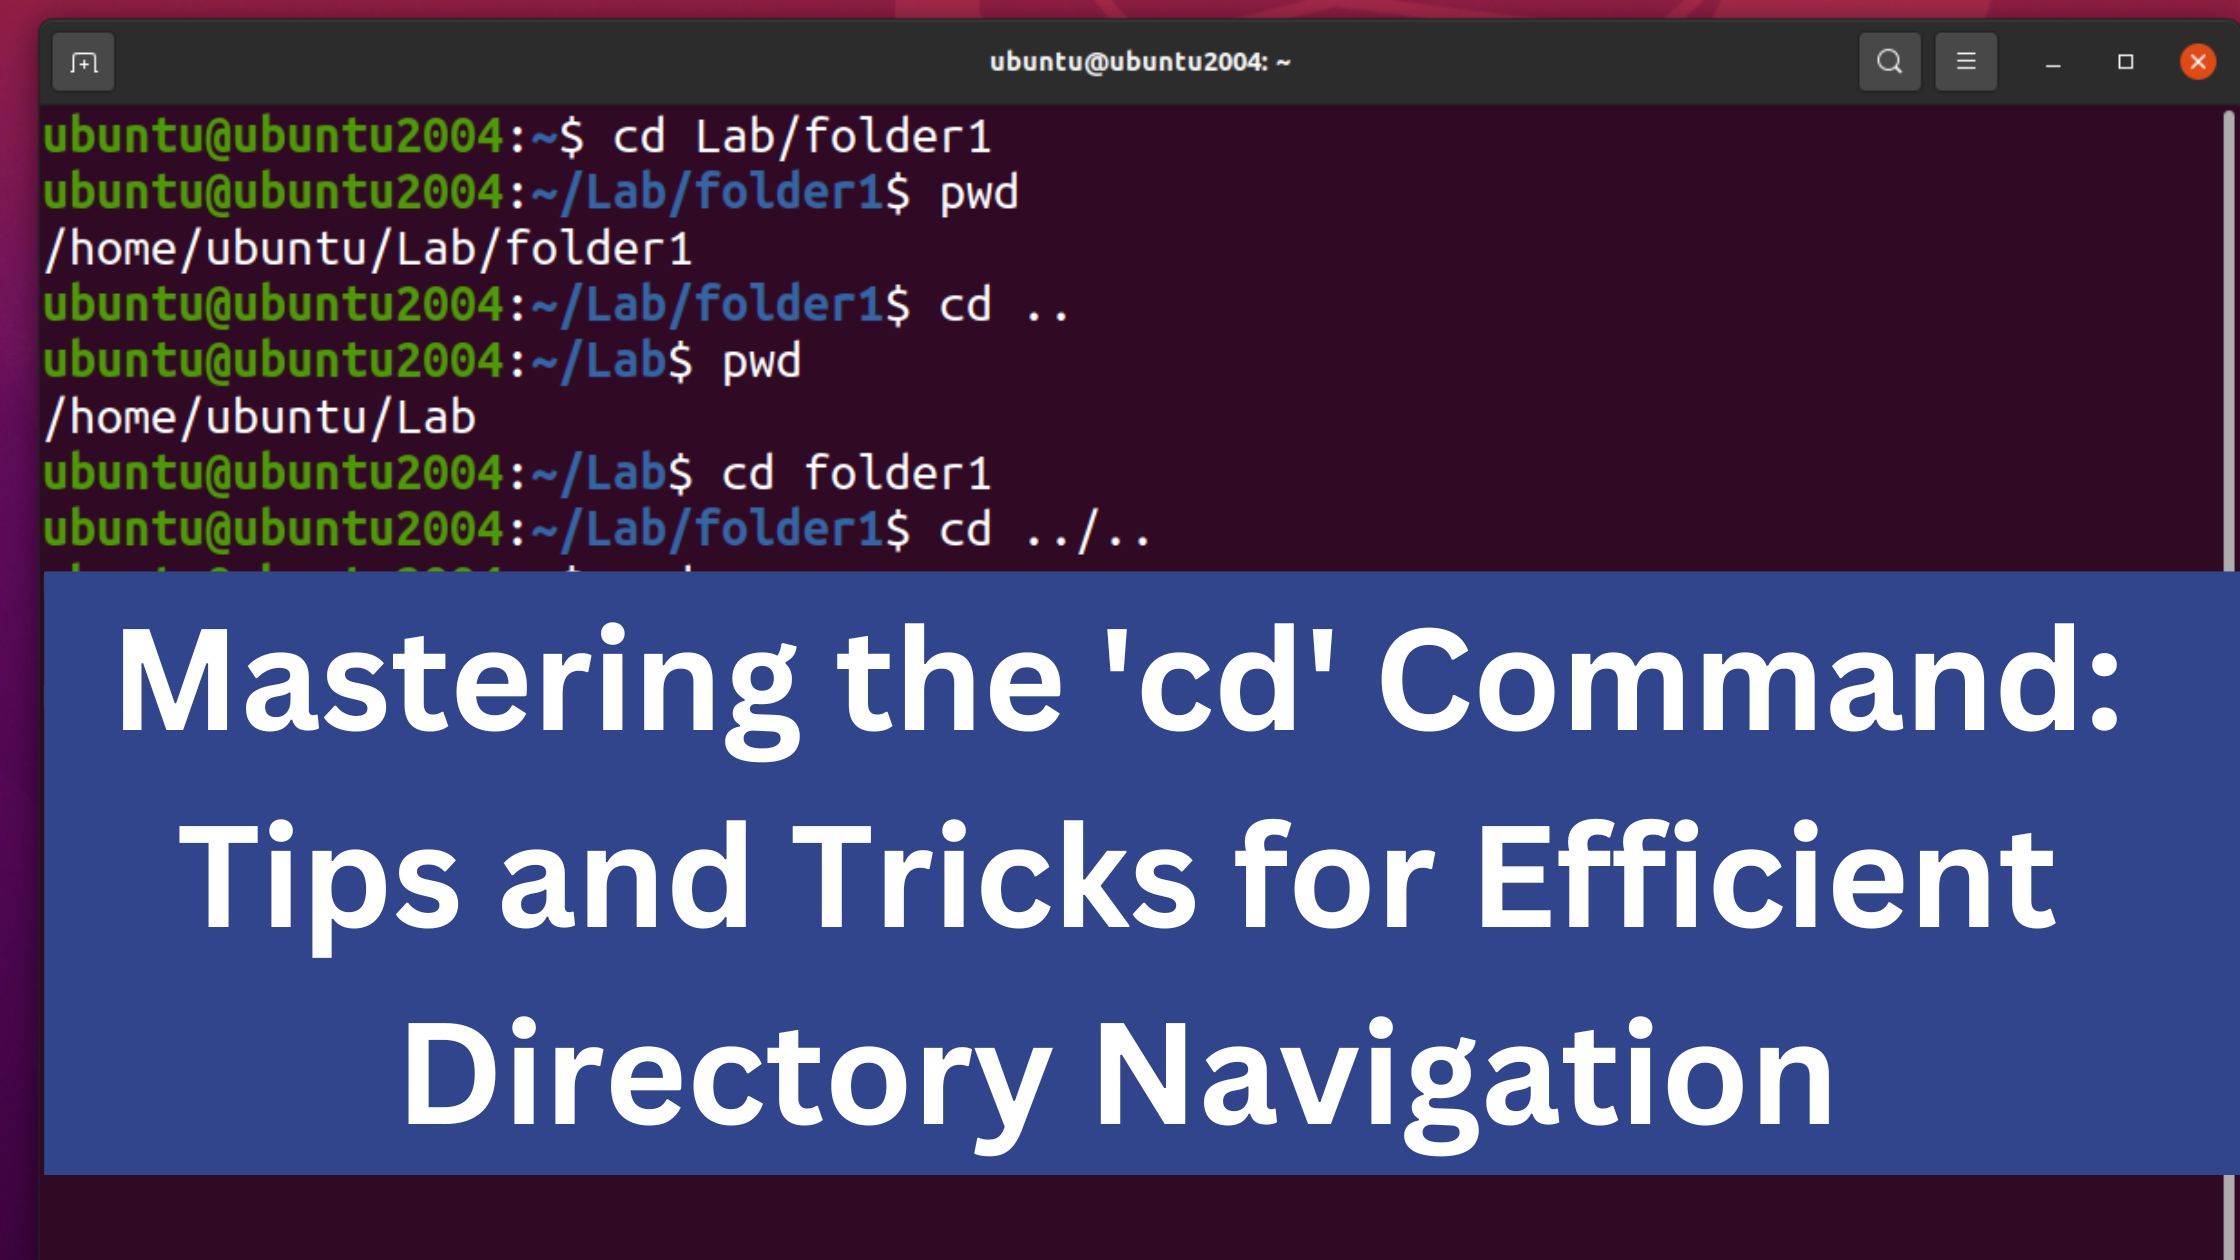 Mastering the ‘cd’ Command: Tips and Tricks for Efficient Directory Navigation